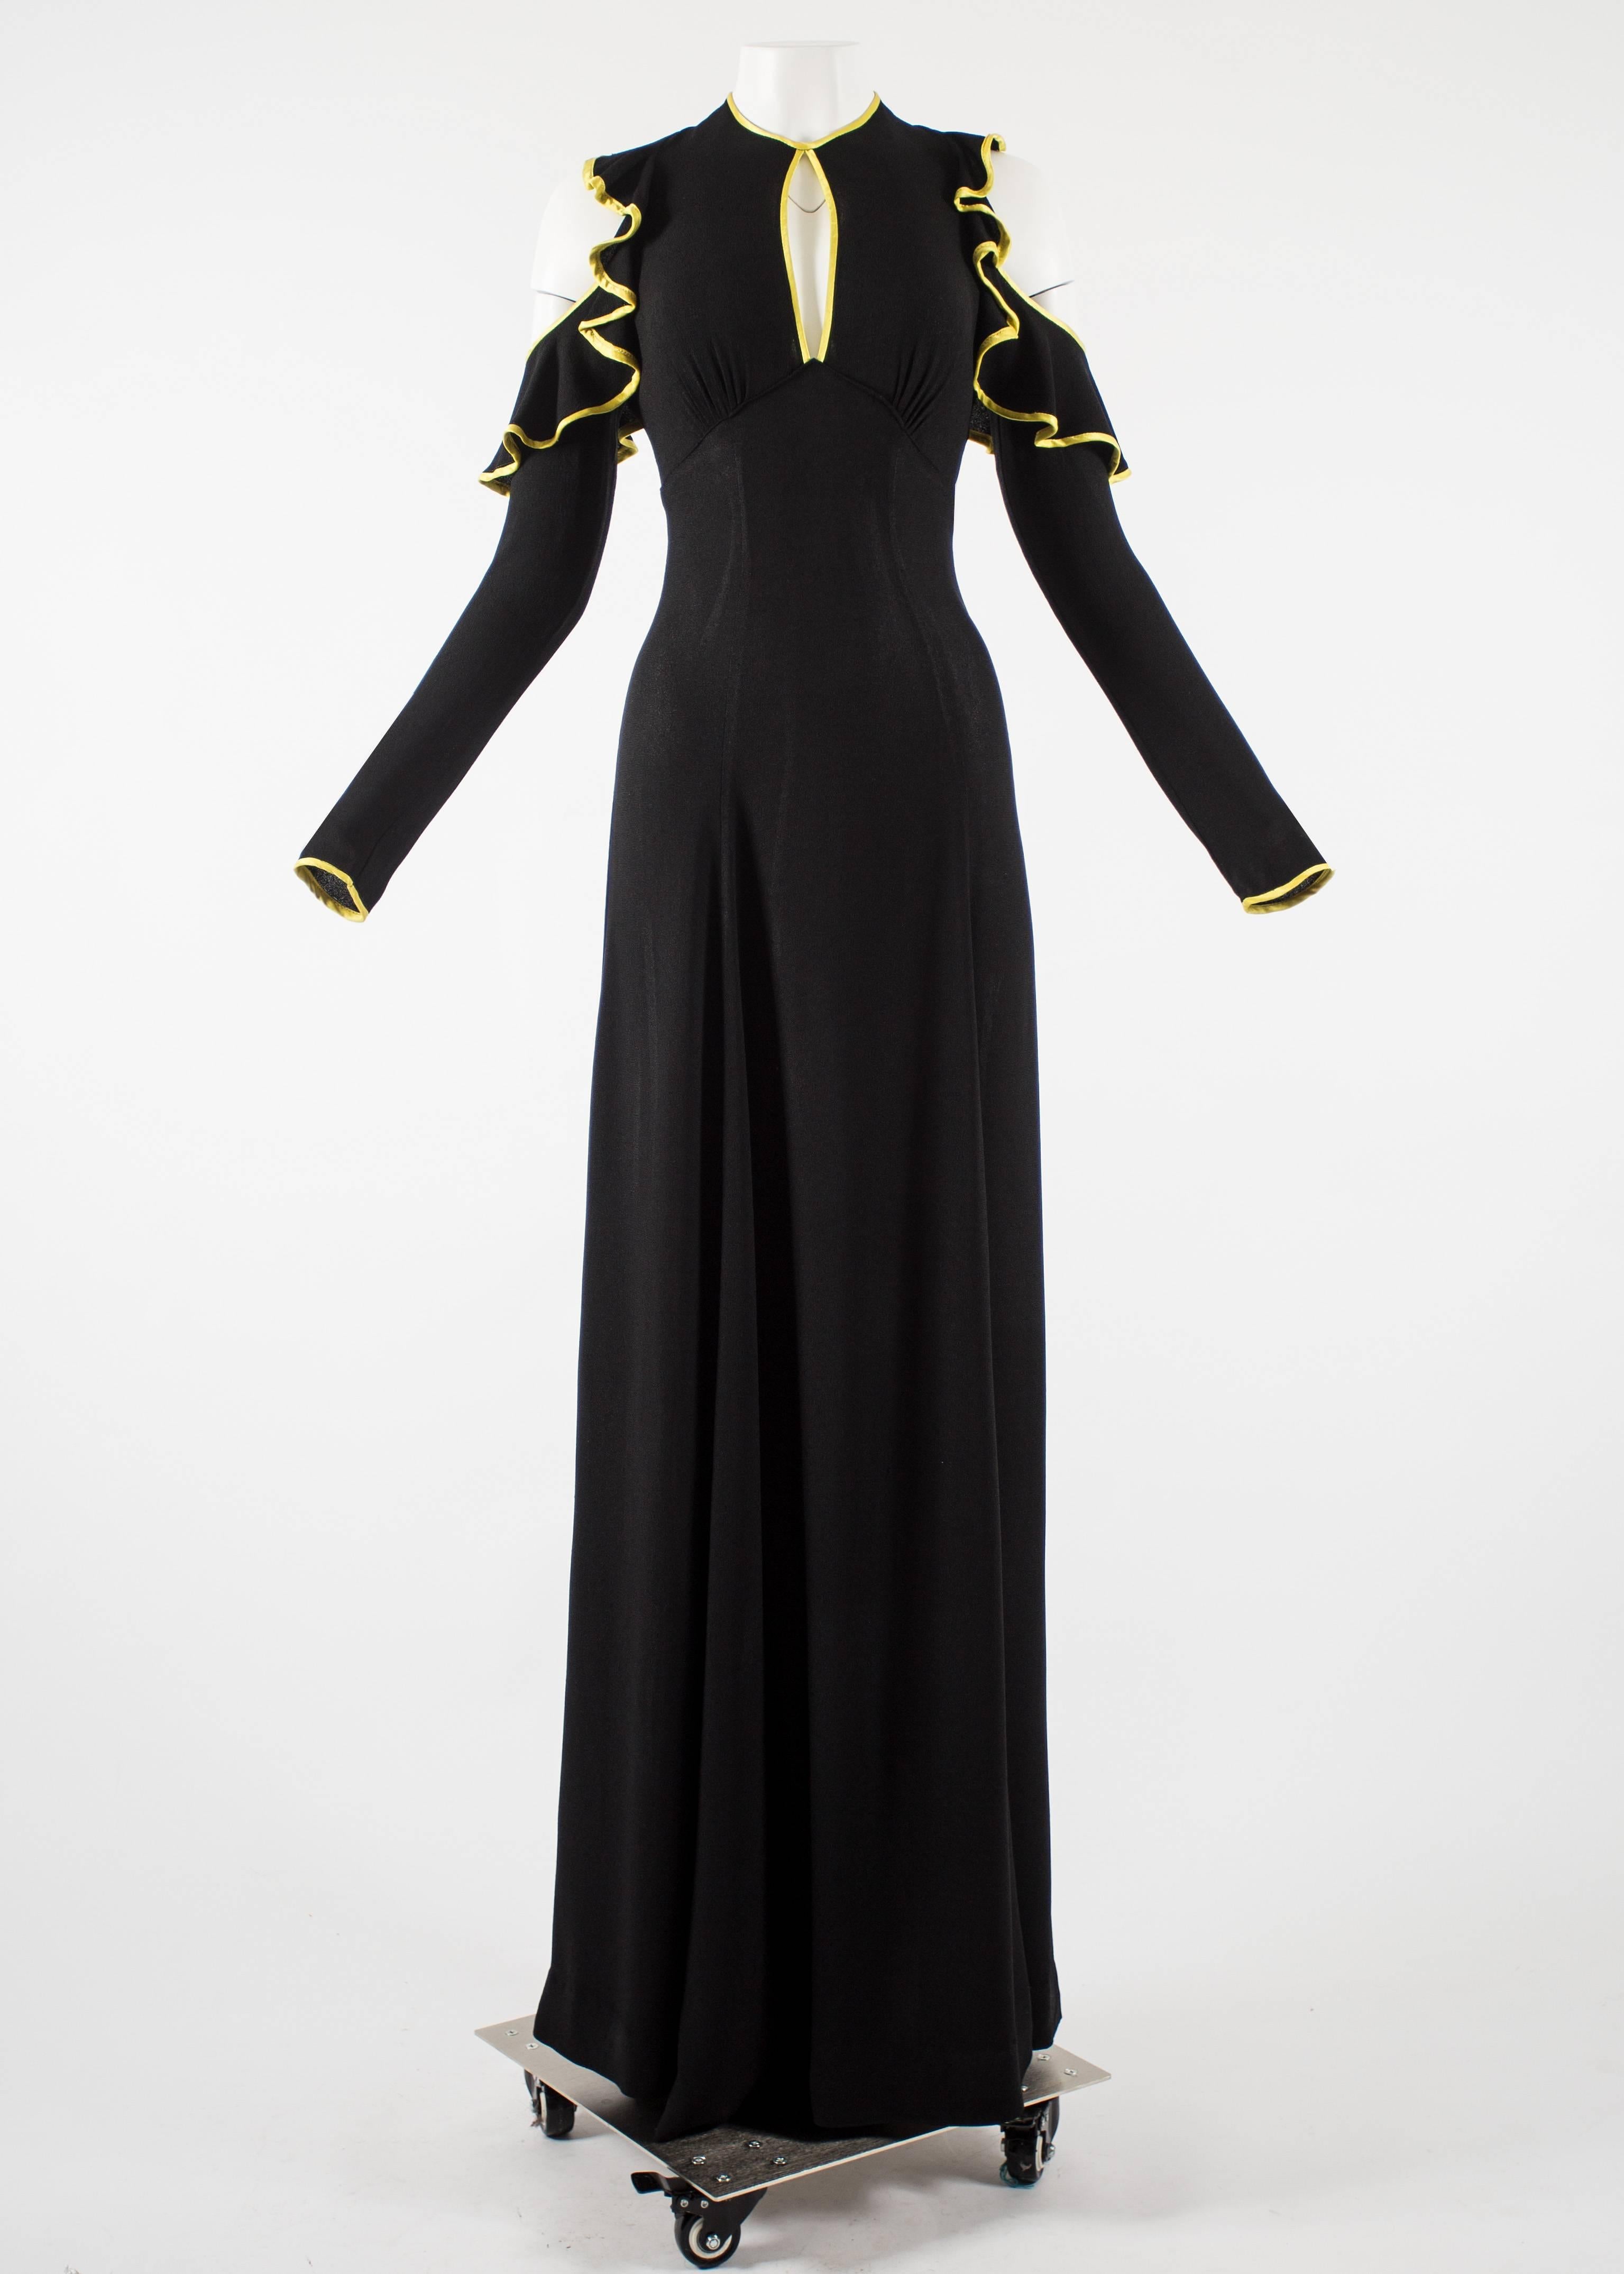 Ossie Clark 1968 black moss crepe  evening dress. Cold shoulder design with ruffles, yellow satin trim throughout, peek-a-boo cleavage, open back, bow fastening and metal zip closure on waist.

